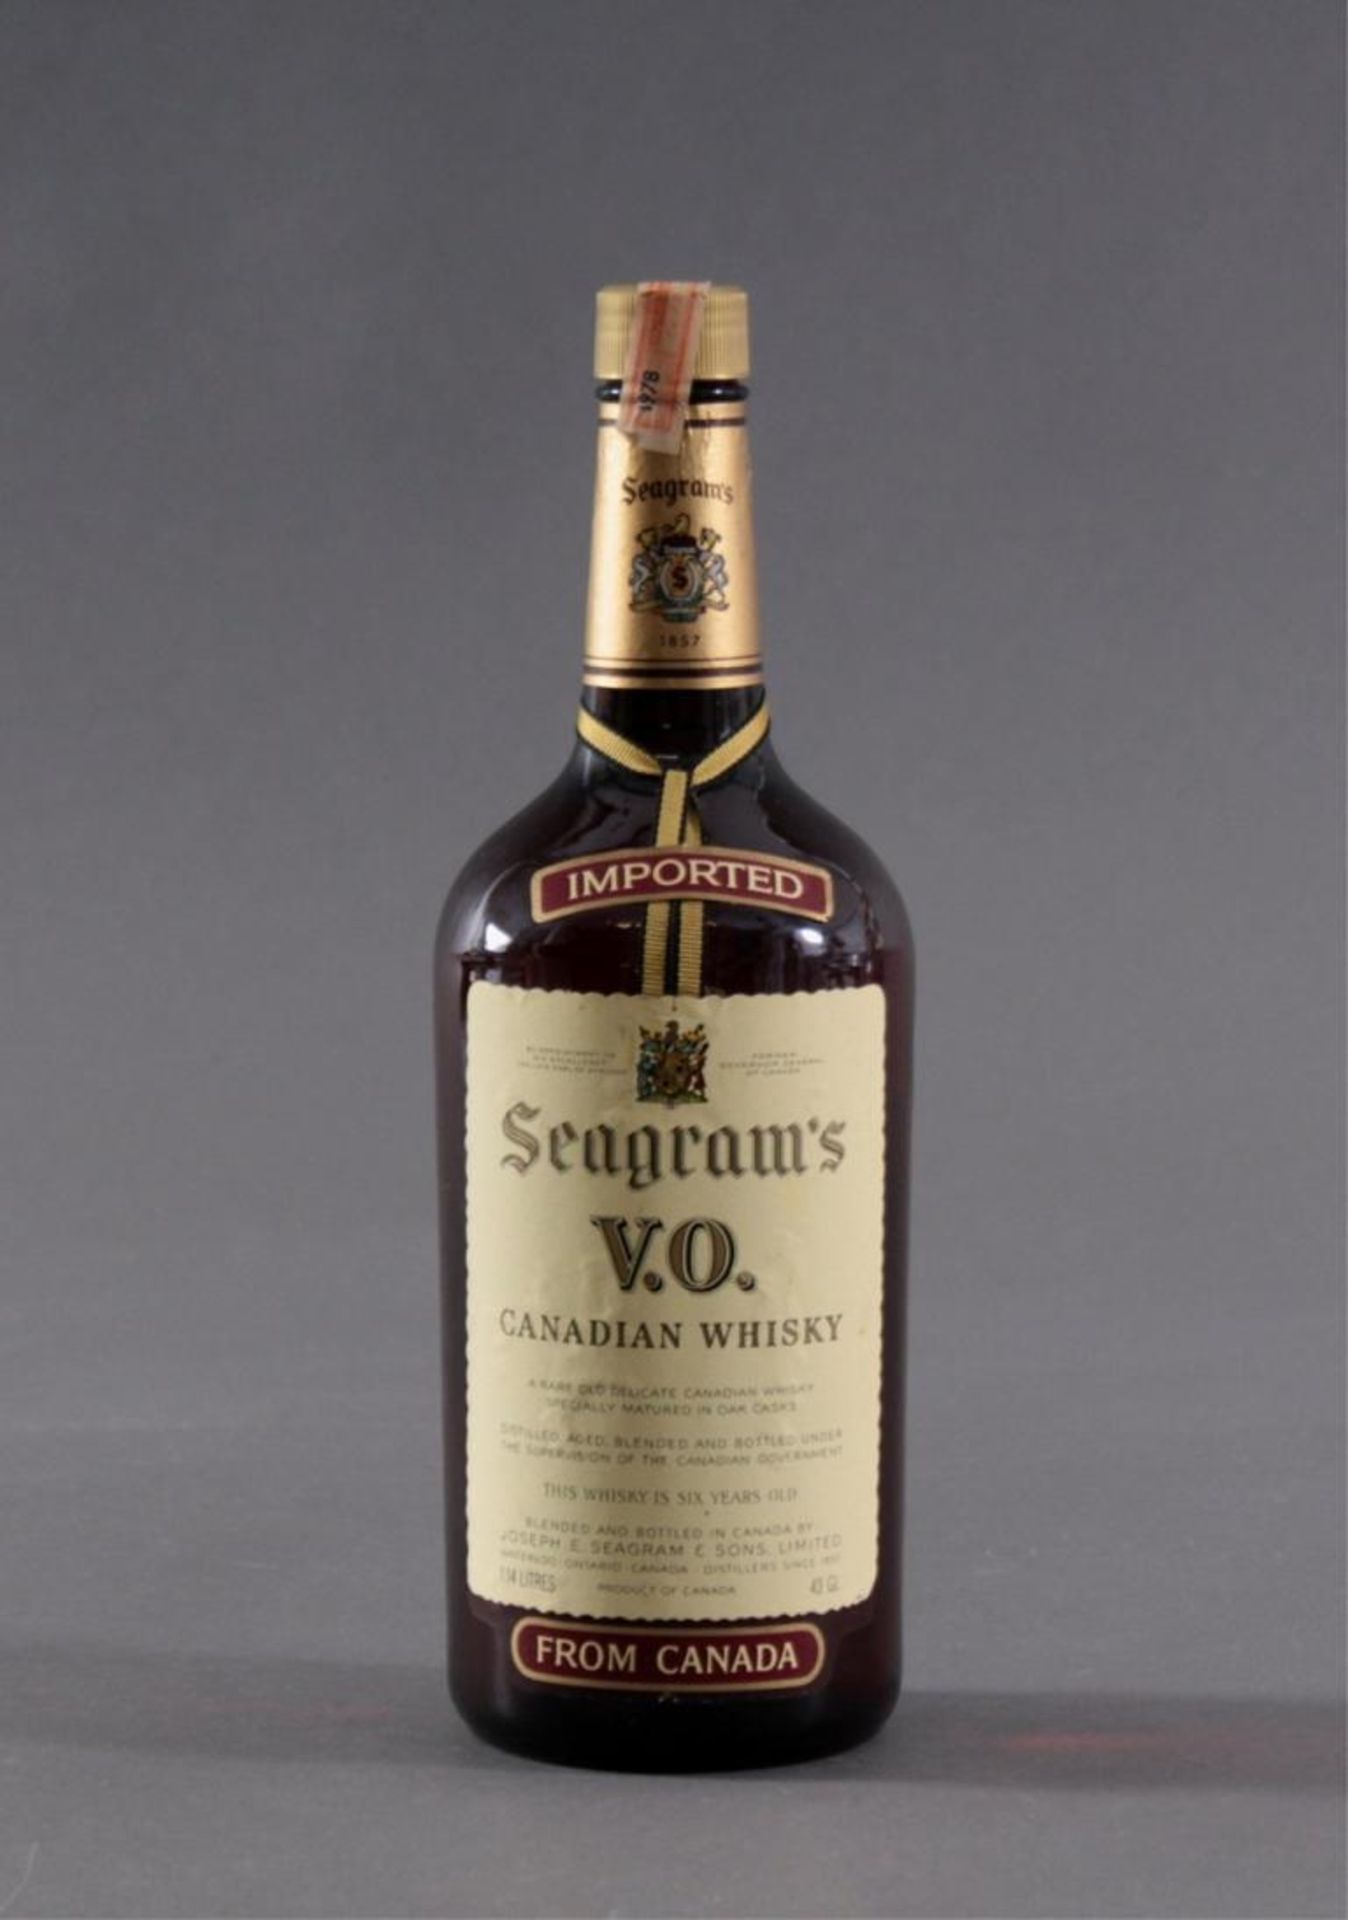 Seagram's V.O. Canadian Whisky, 1978Joseph E. Seagram & Sons. Limited, 1,14 Liter Flasche